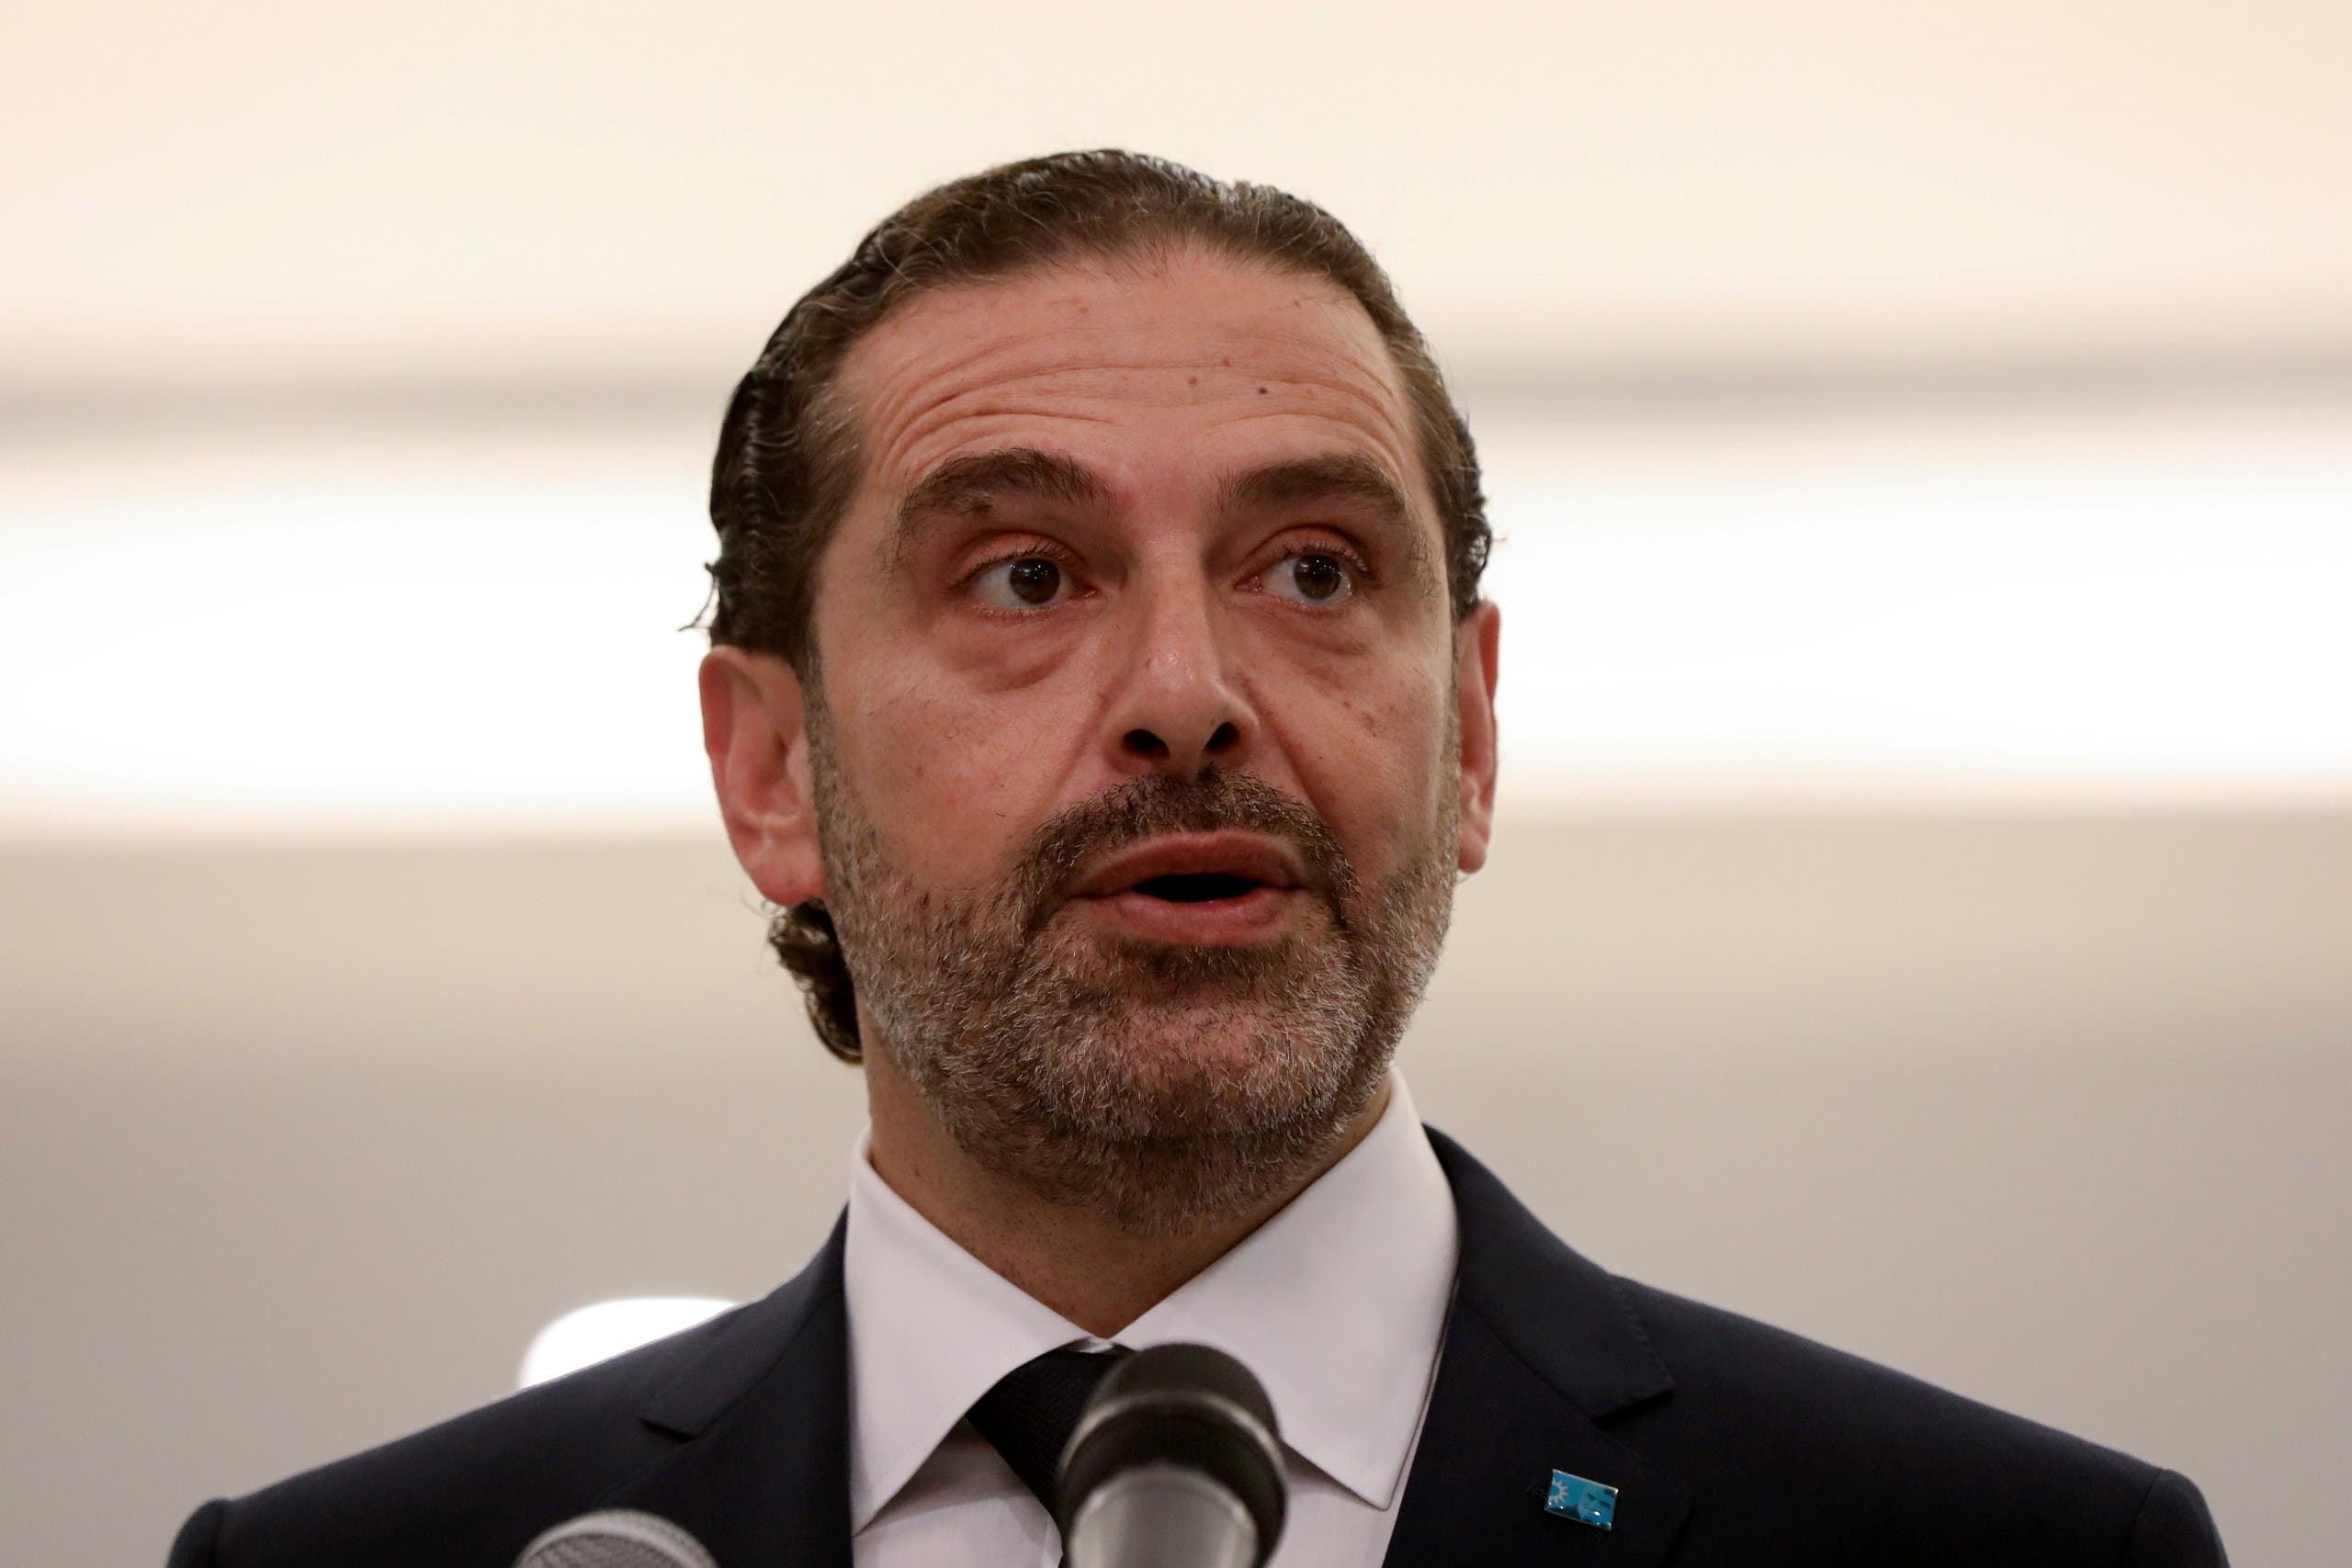 Prime Minister-designate Saad al-Hariri speaks after meeting with Lebanon's President Michel Aoun at the presidential palace in Baabda, Lebanon March 22, 2021. (Reuters)